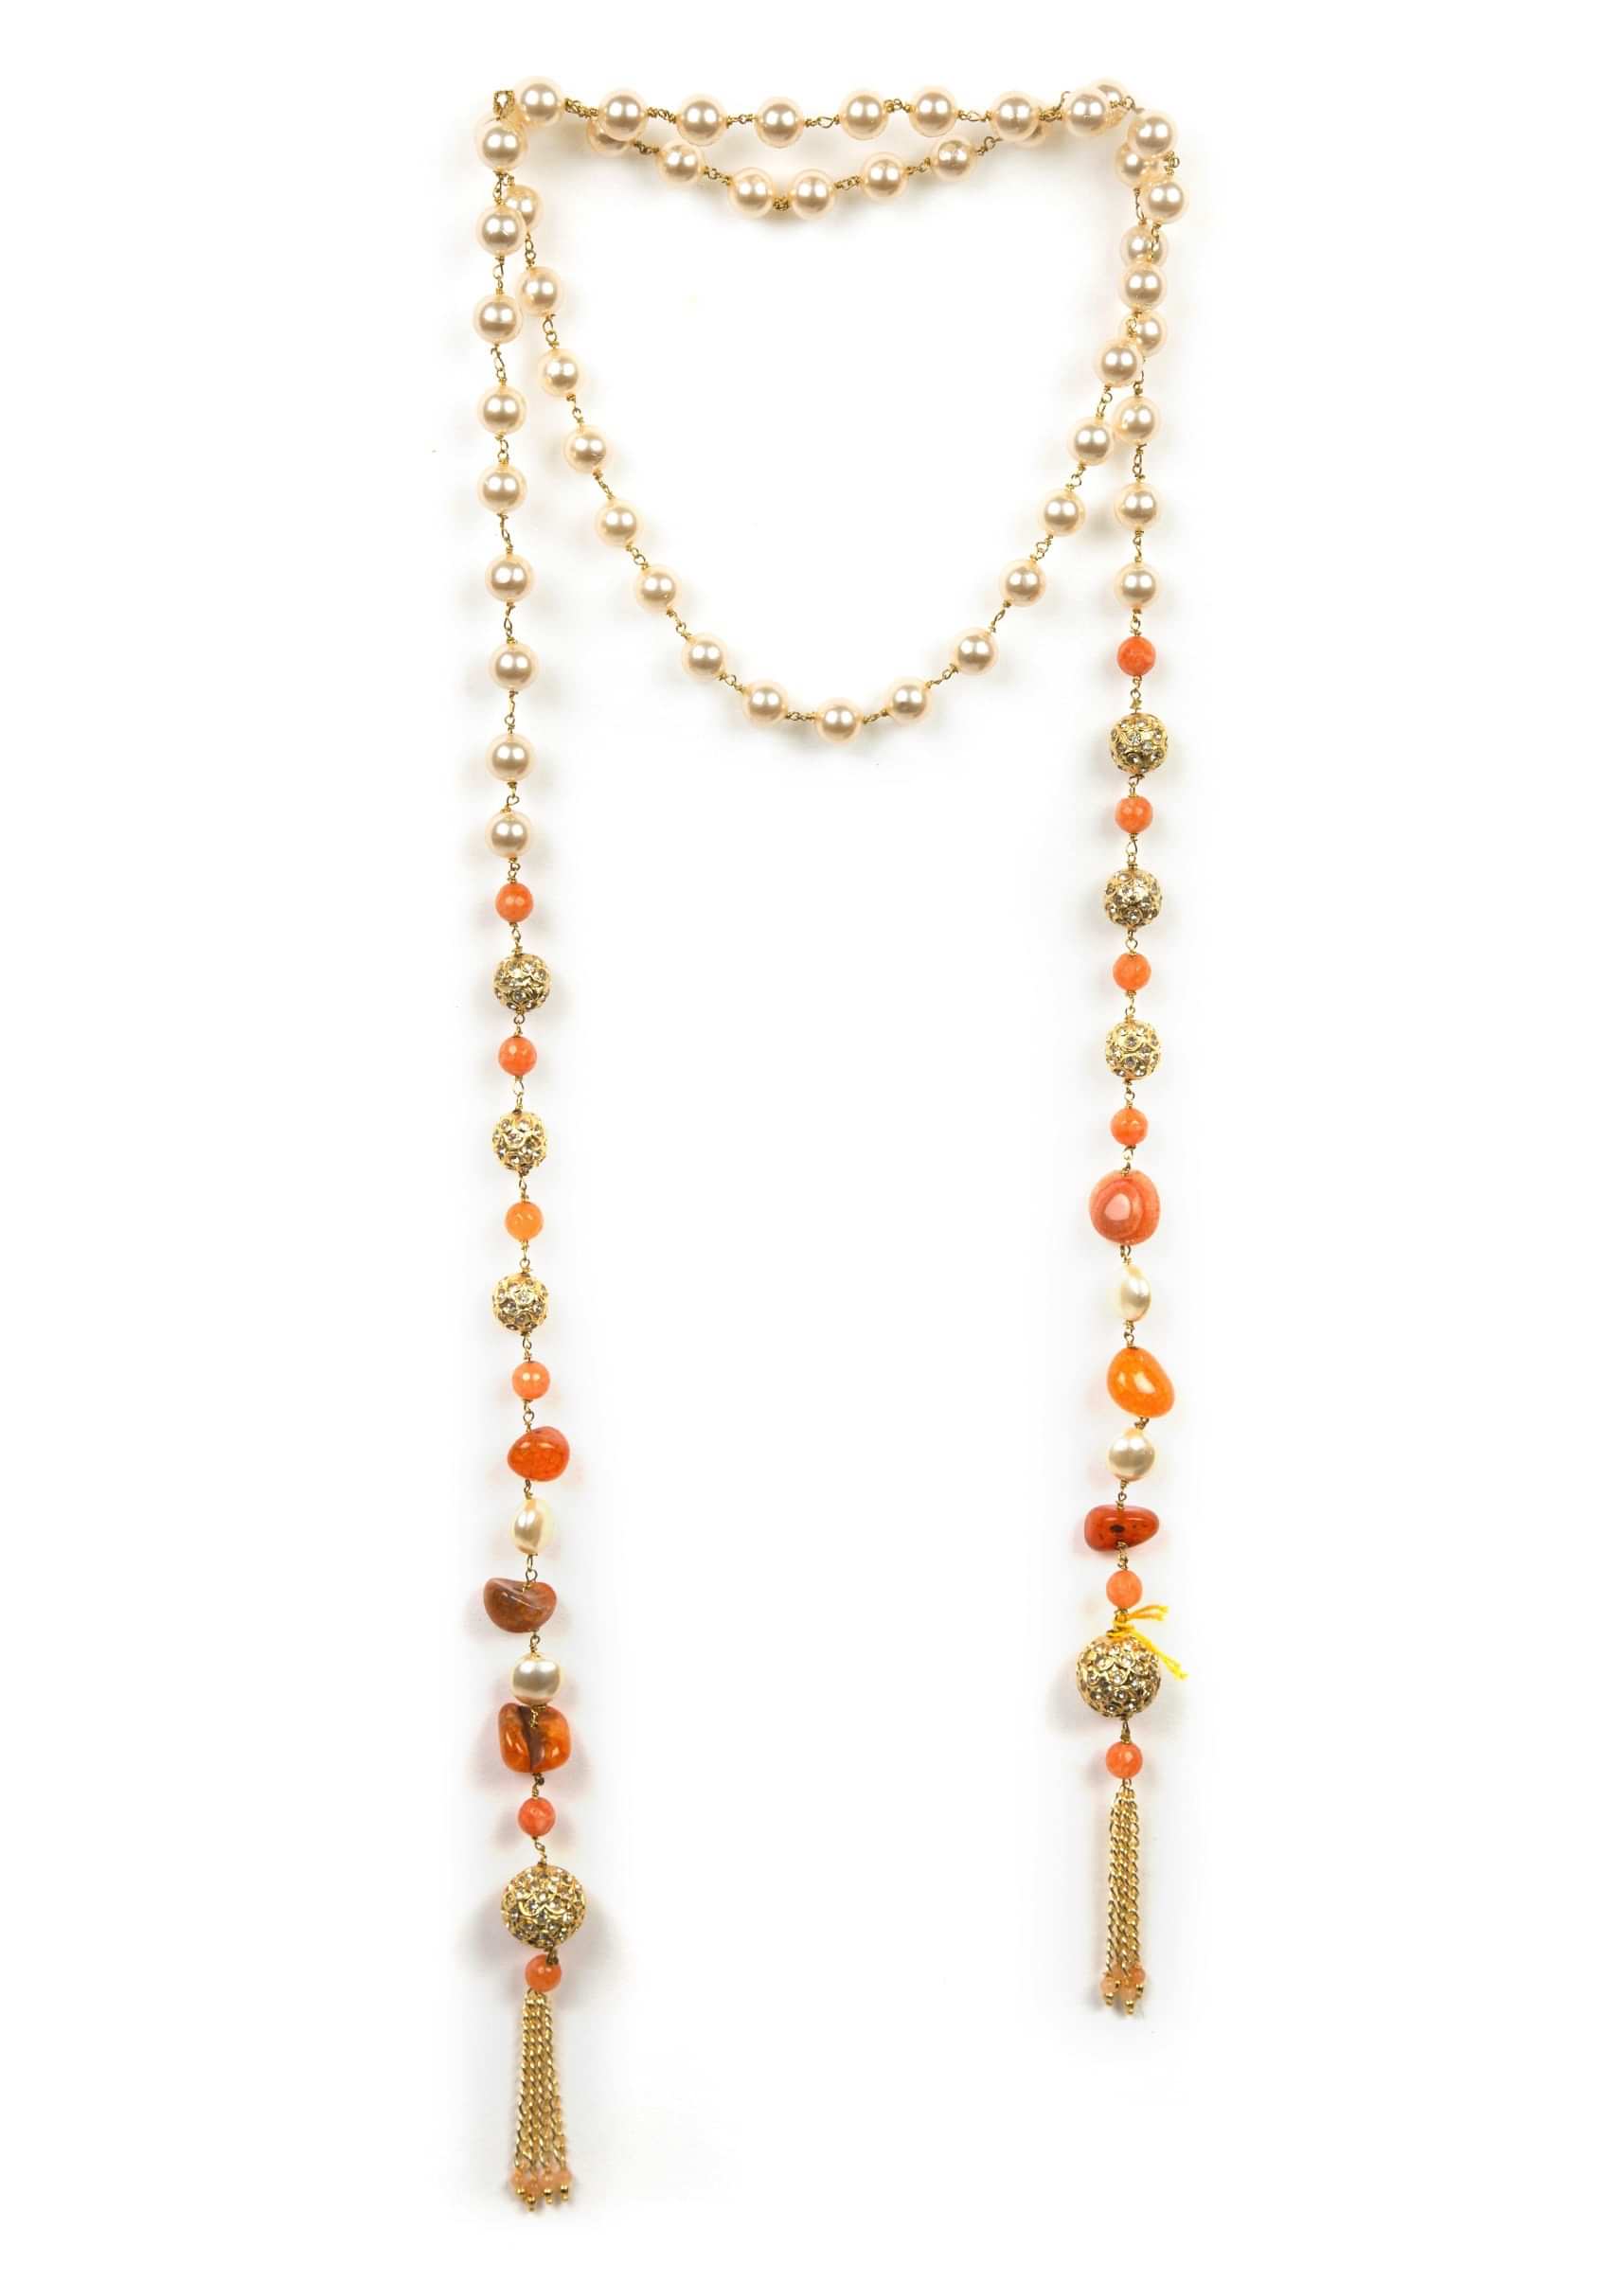 Fancy beaded wrap around necklace only on Kalki